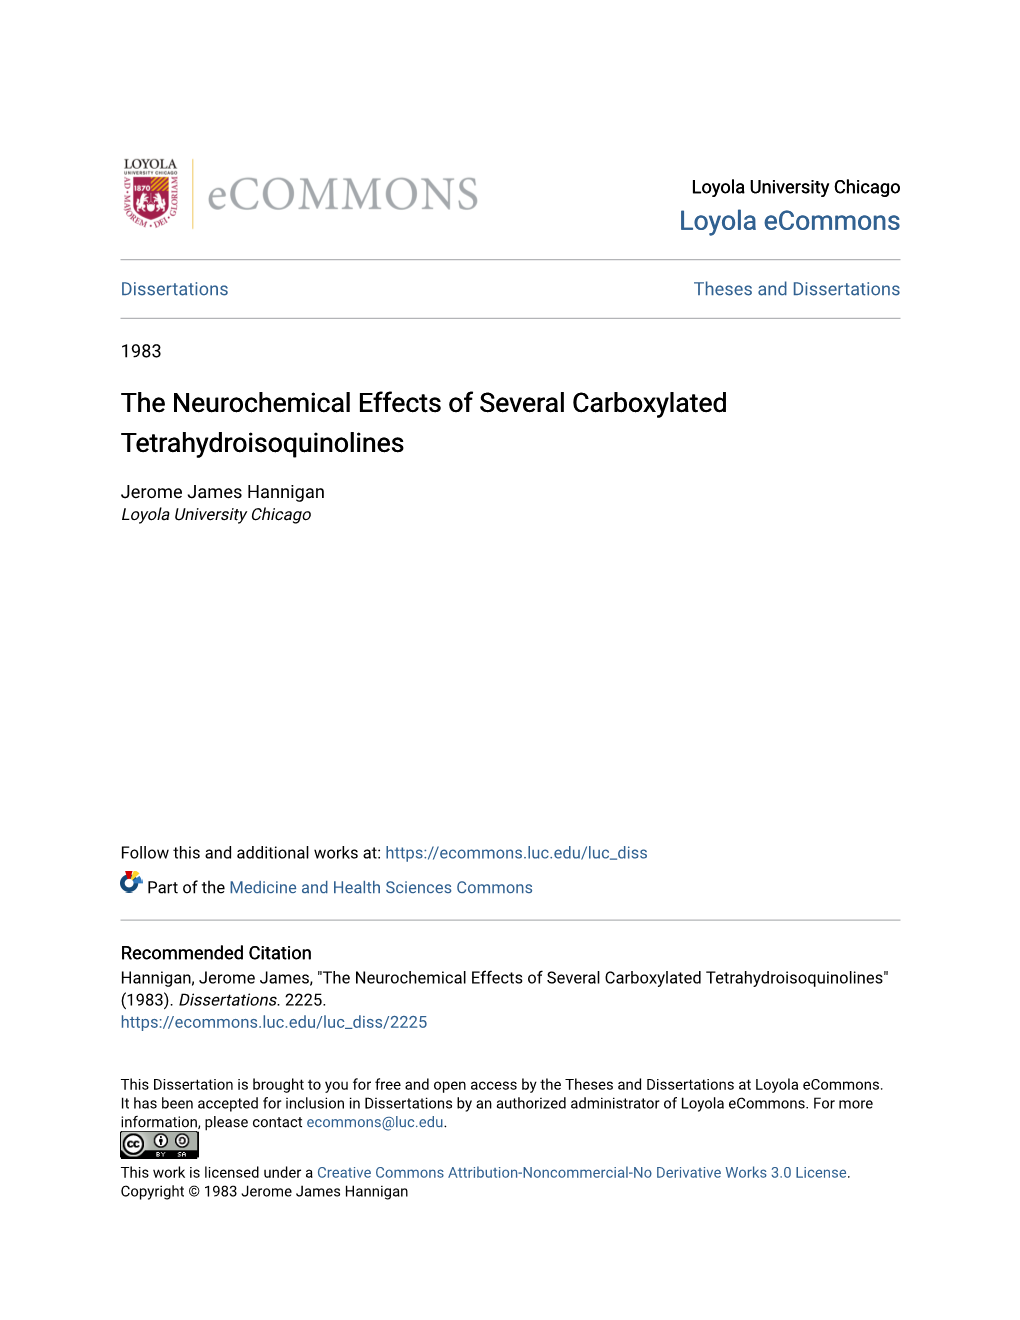 The Neurochemical Effects of Several Carboxylated Tetrahydroisoquinolines